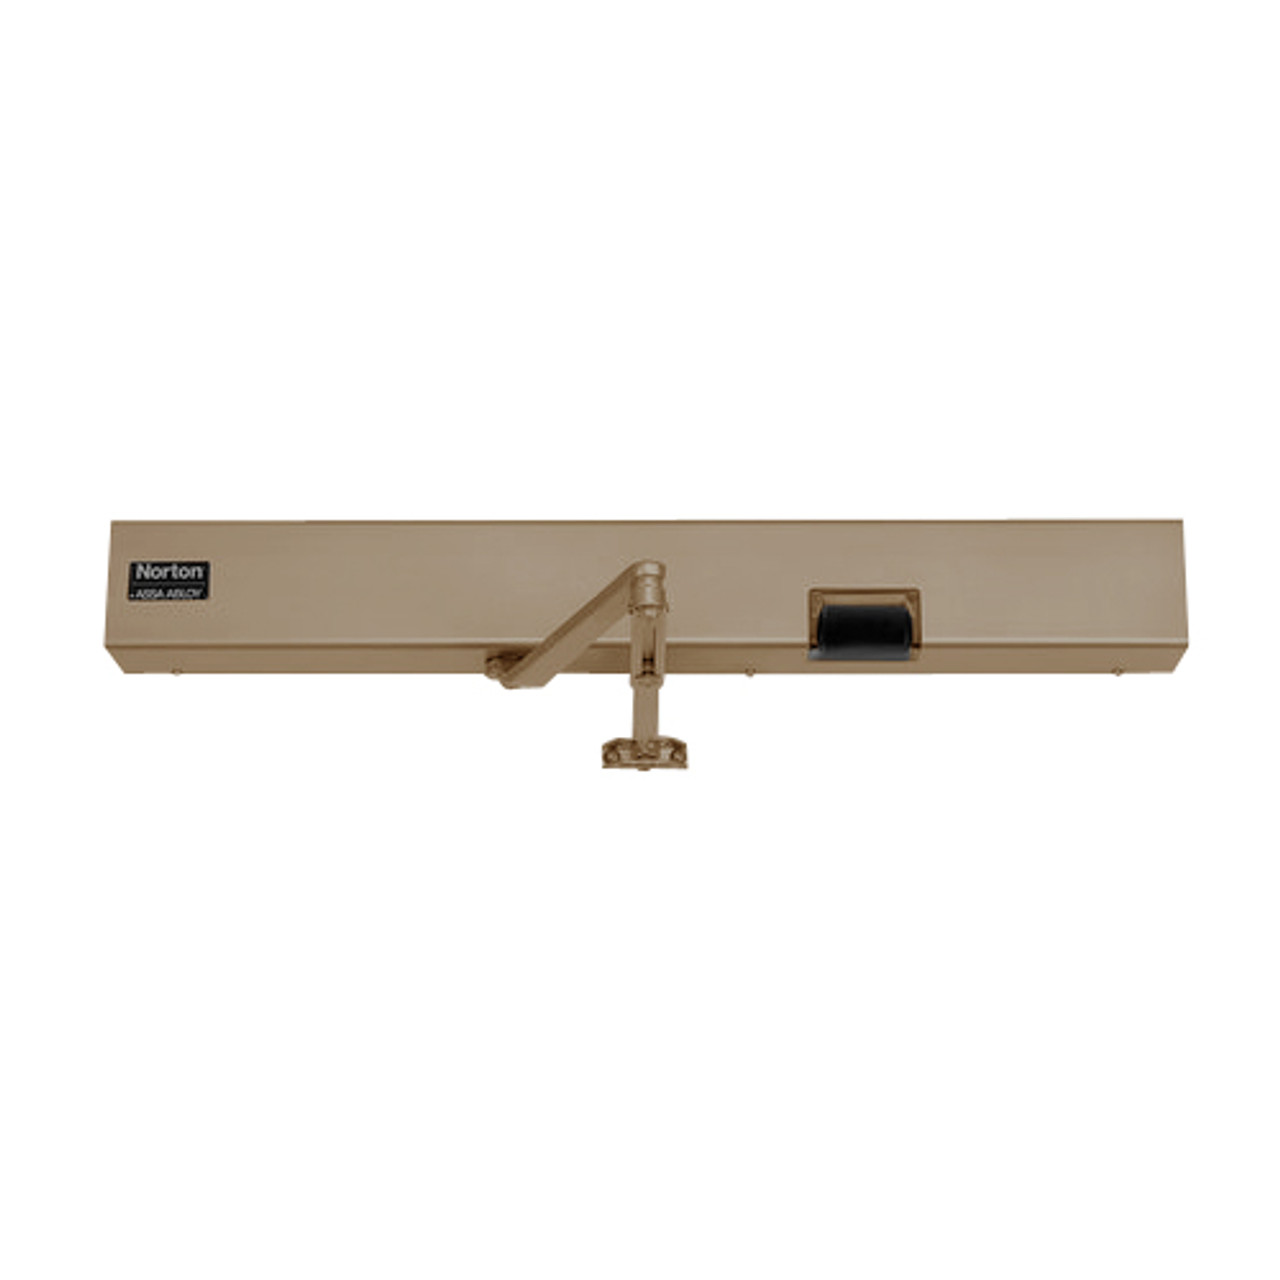 7135SZ-DZ-RH-120VAC-691 Norton 7100SZ Series Safe Zone Multi-Point Closer/Holder with Motion Sensor and Push Side Double Lever 13-1/2 inch Main Arm in Dull Bronze Finish